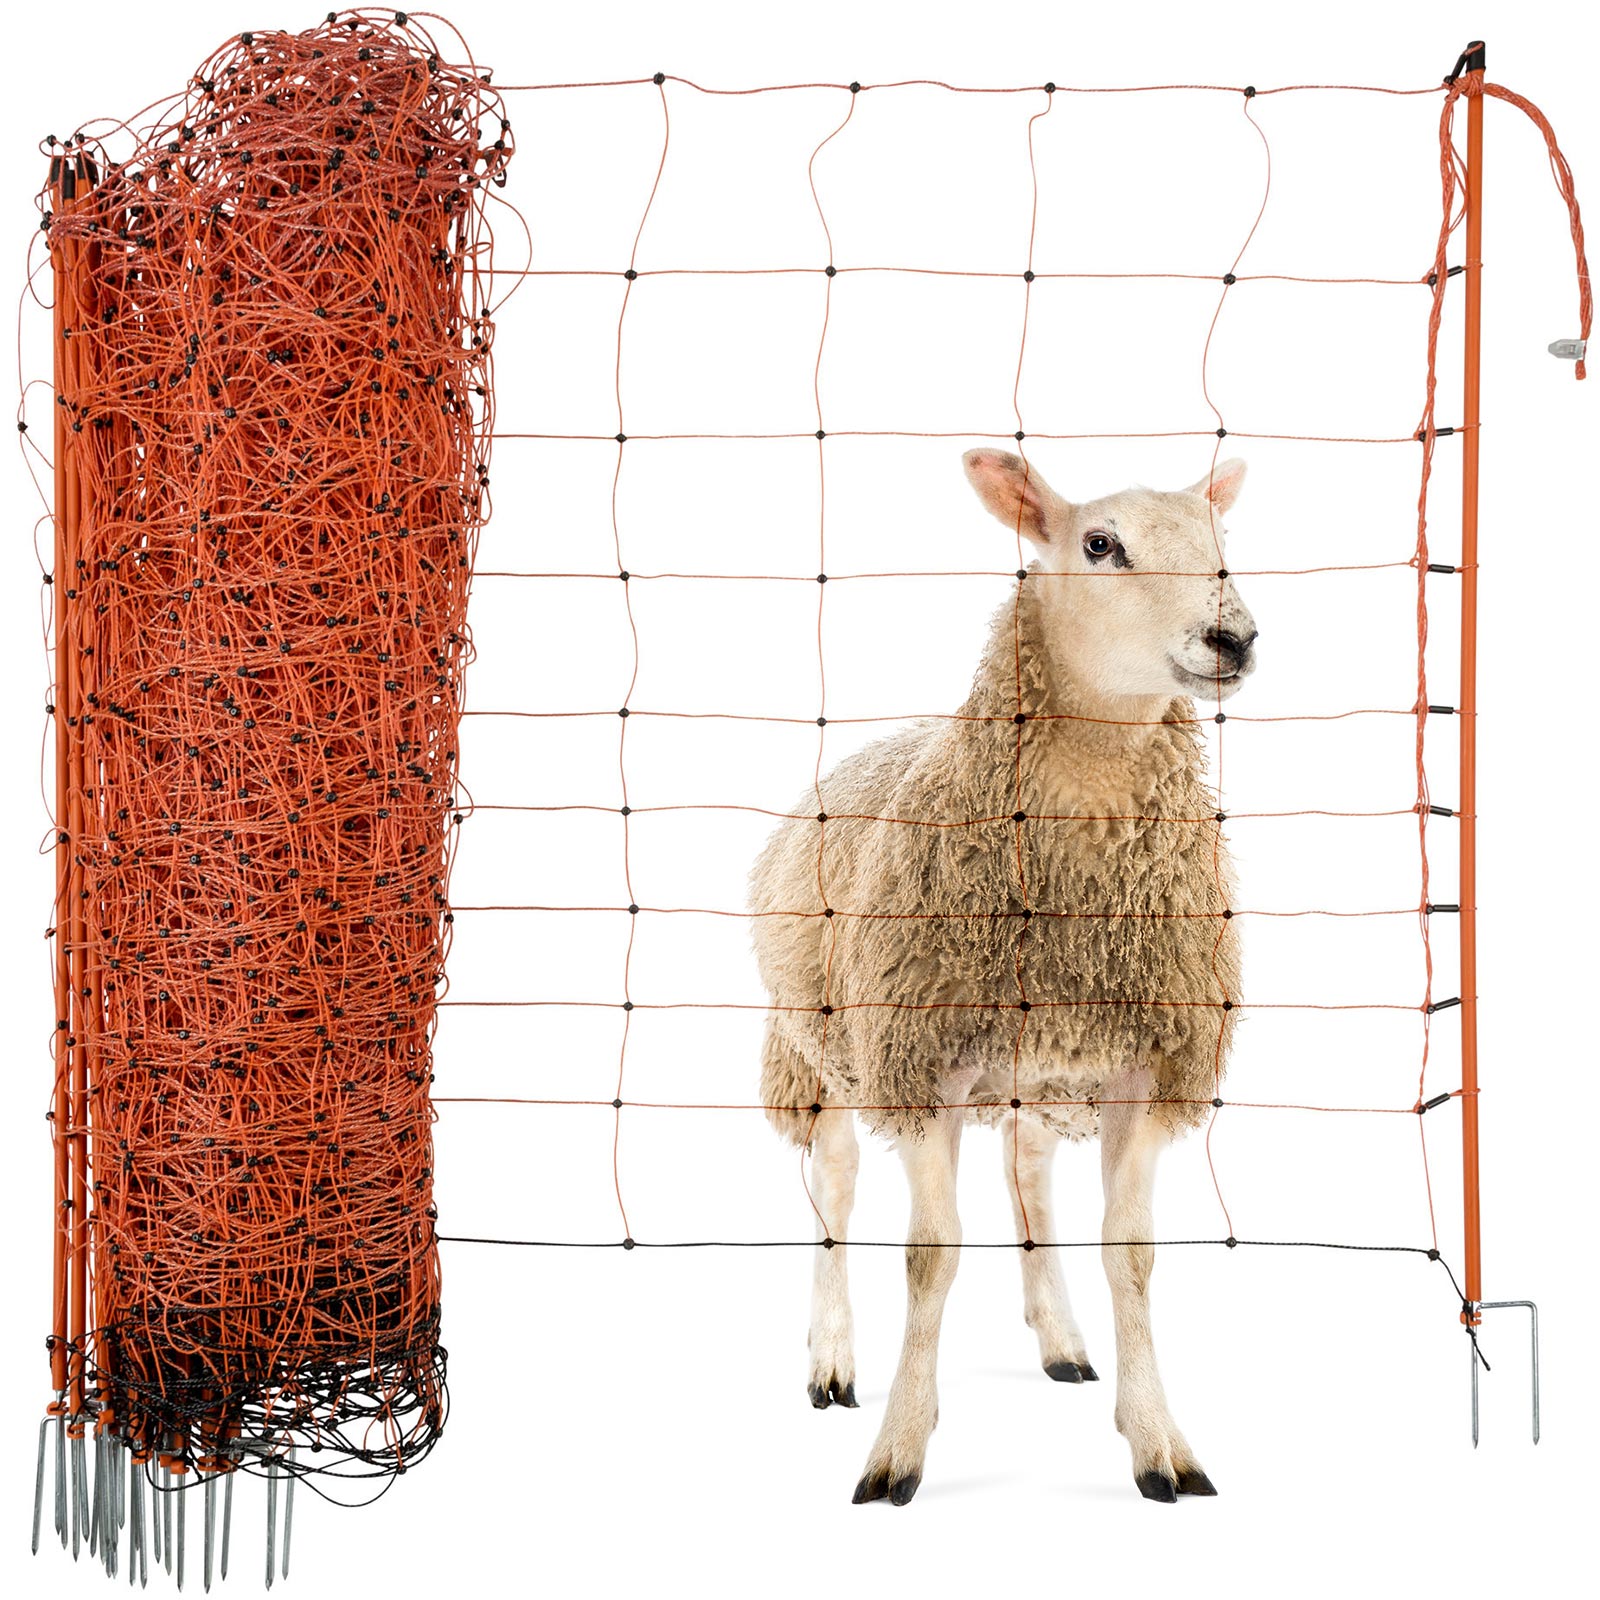 Agrarzone Sheep Net electrificable, double tip, orange